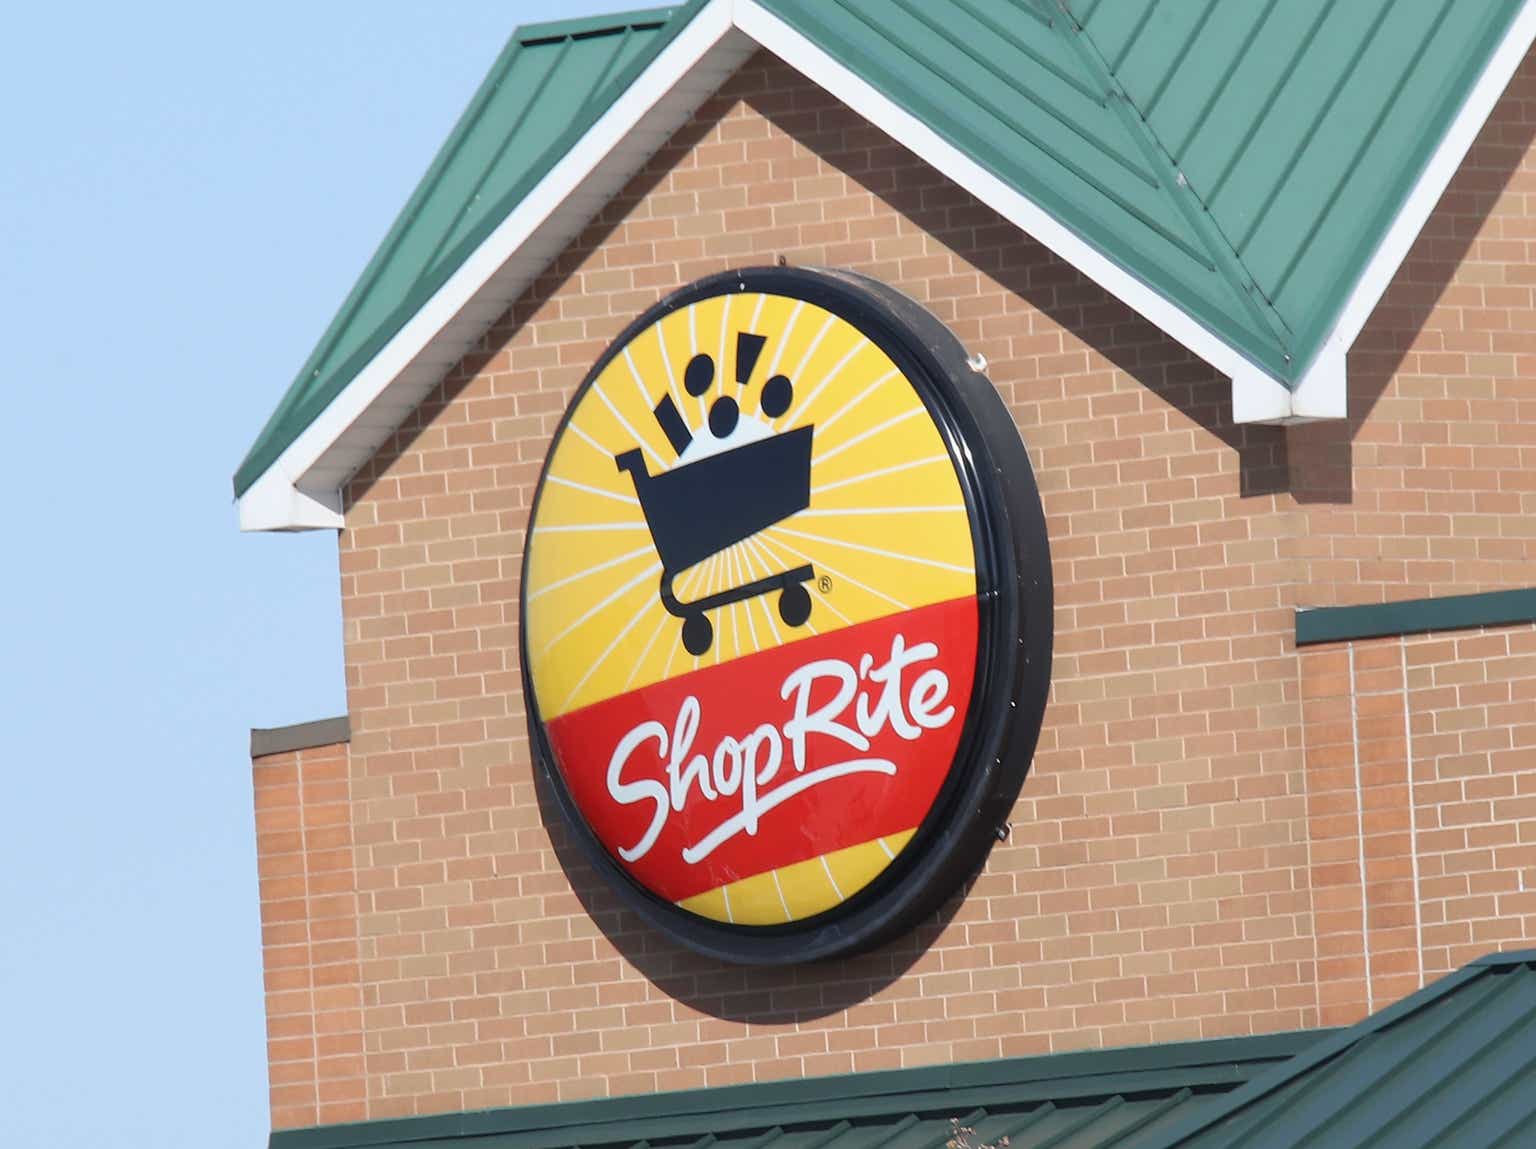 ShopRite Named Most-Trusted Supermarket in the Northeast